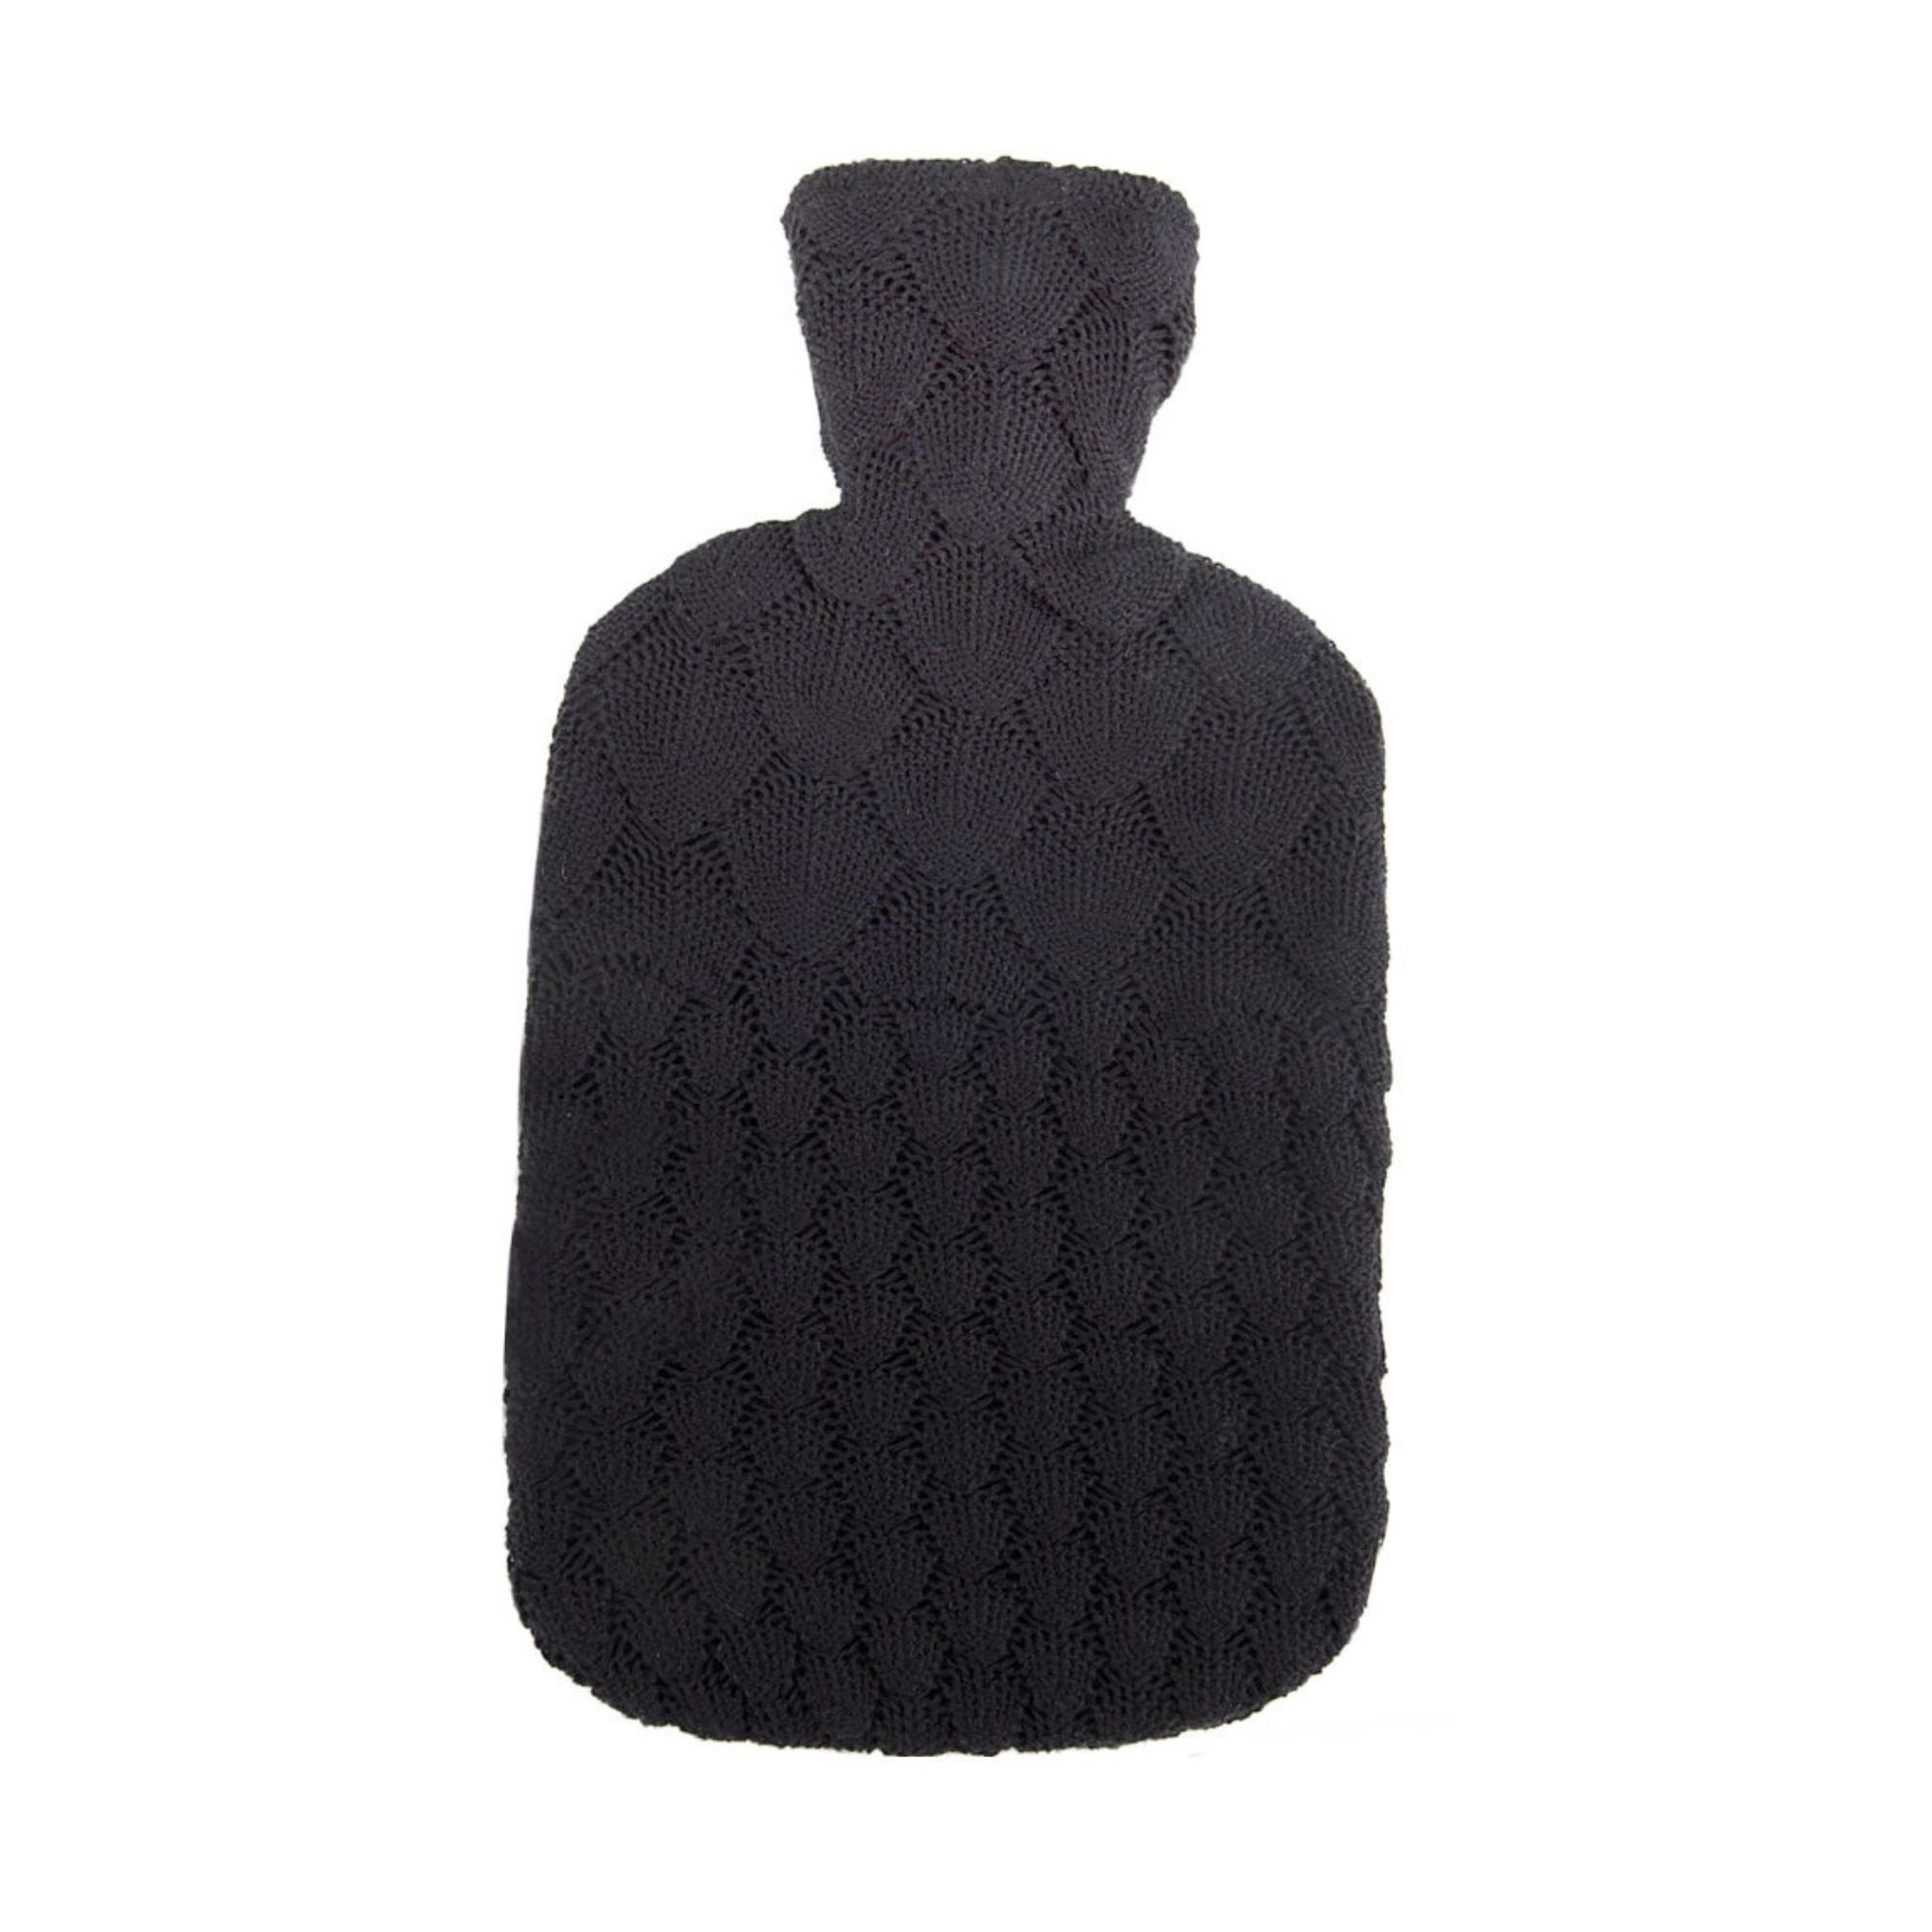 2 Litre Sanger Hot Water Bottle with Knitted Shell Cotton Cover